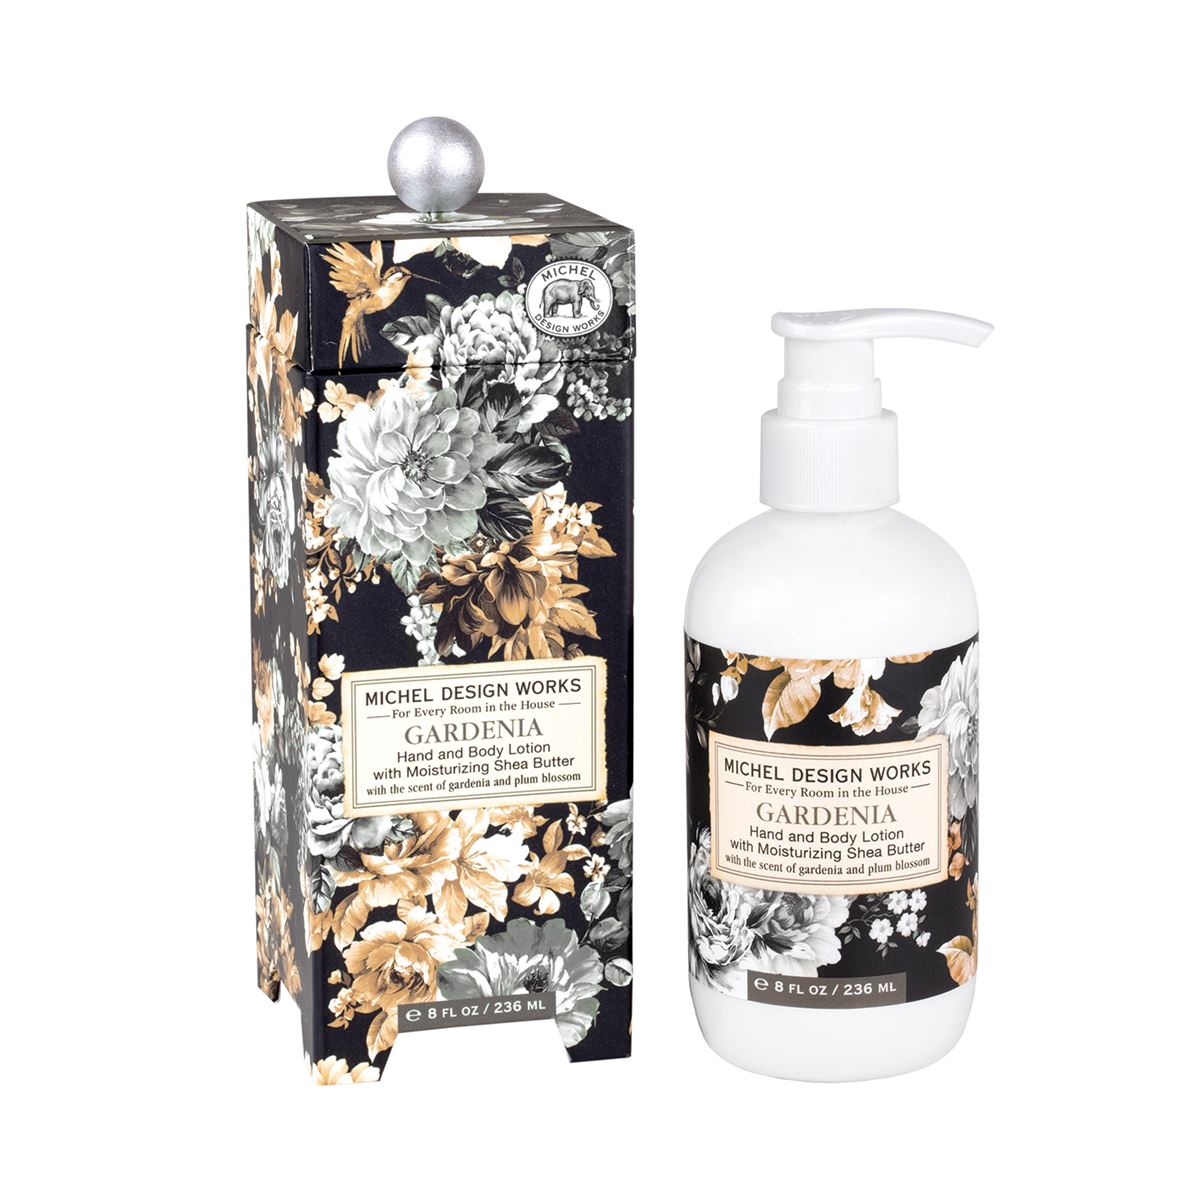 Michel Design Works Gardenia Hand and Body Lotion